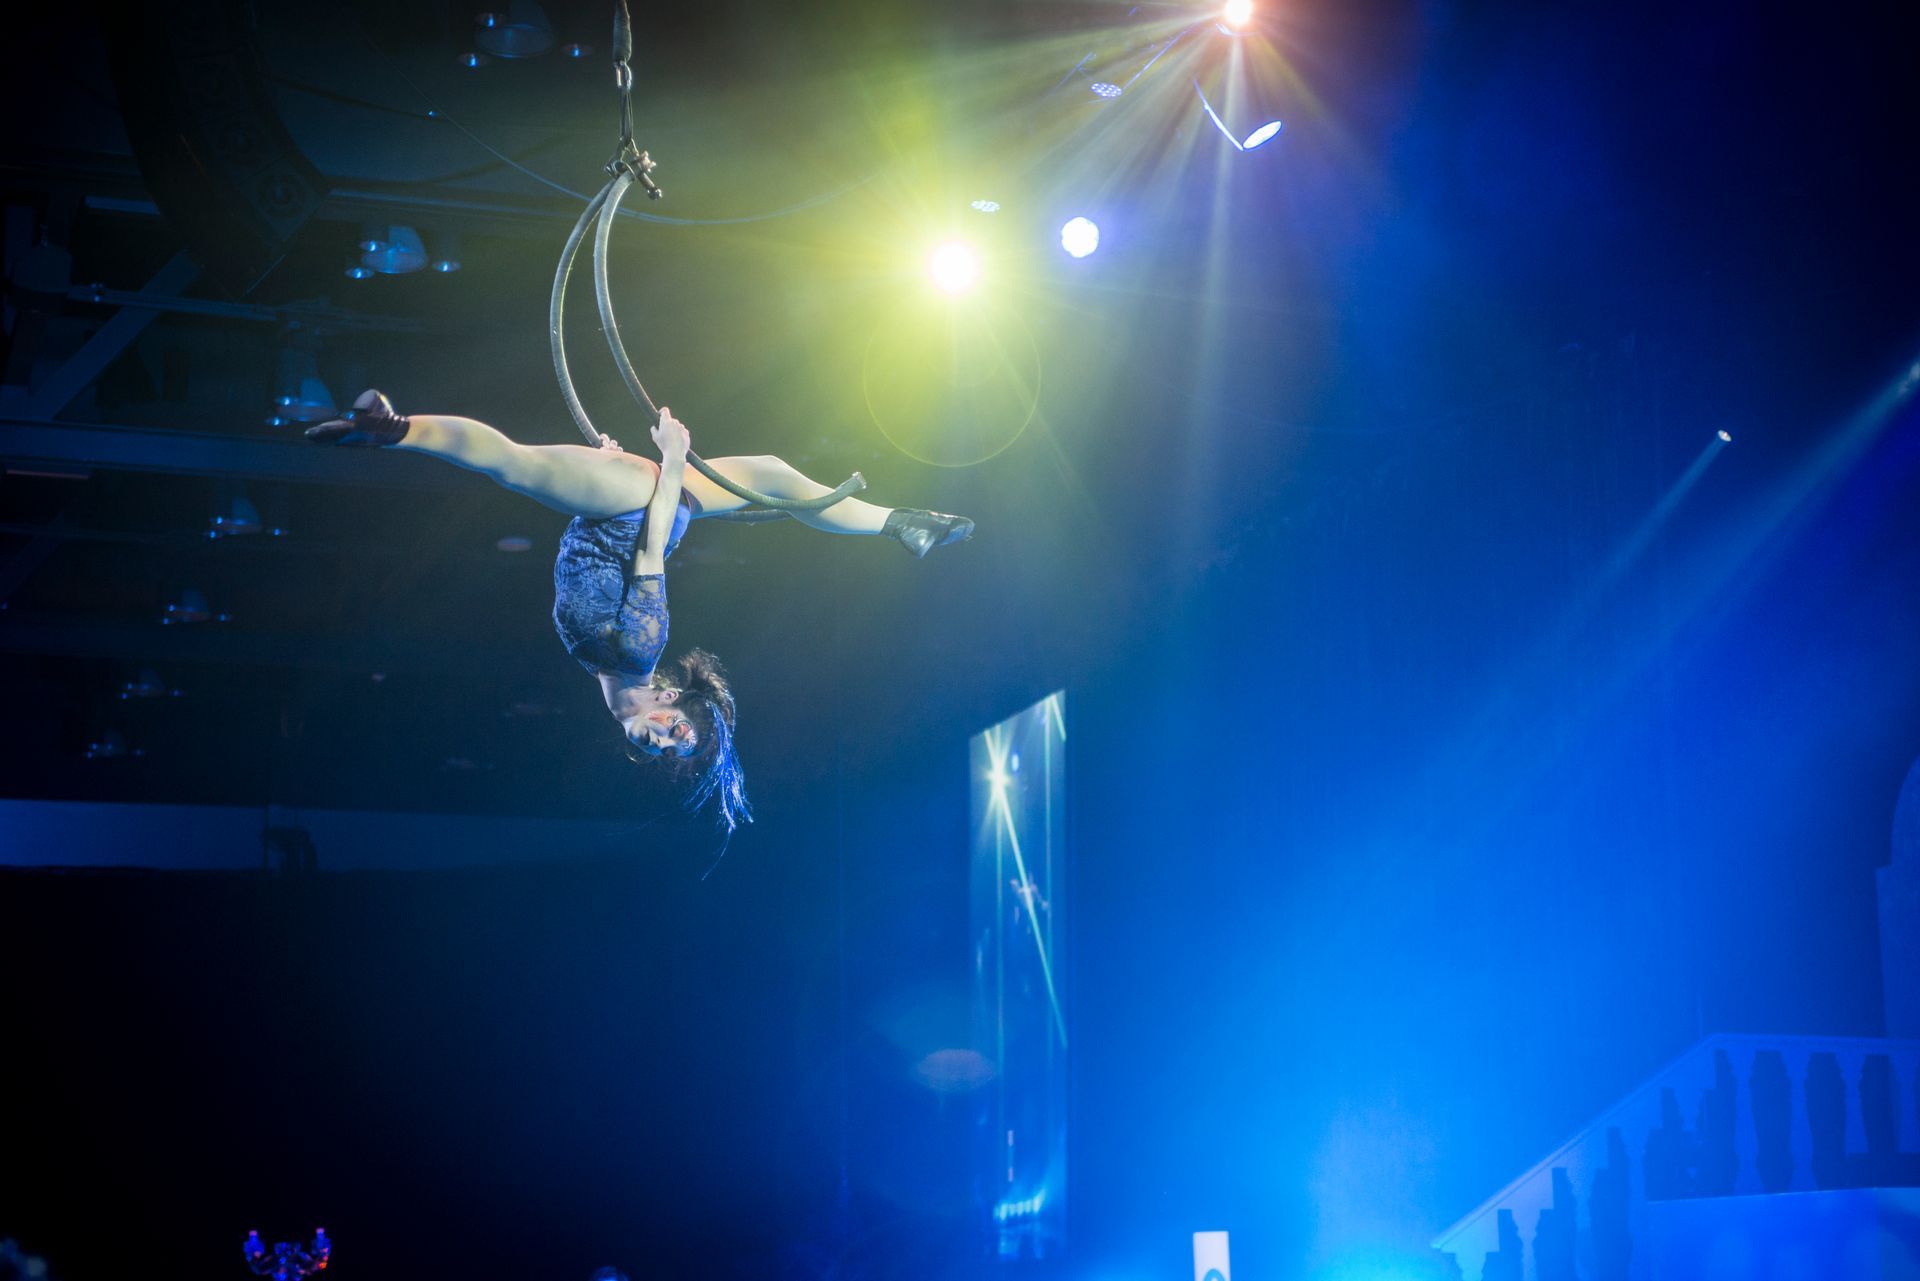 Cirque performer hangs from ceiling at corporate event in Calgary, Alberta